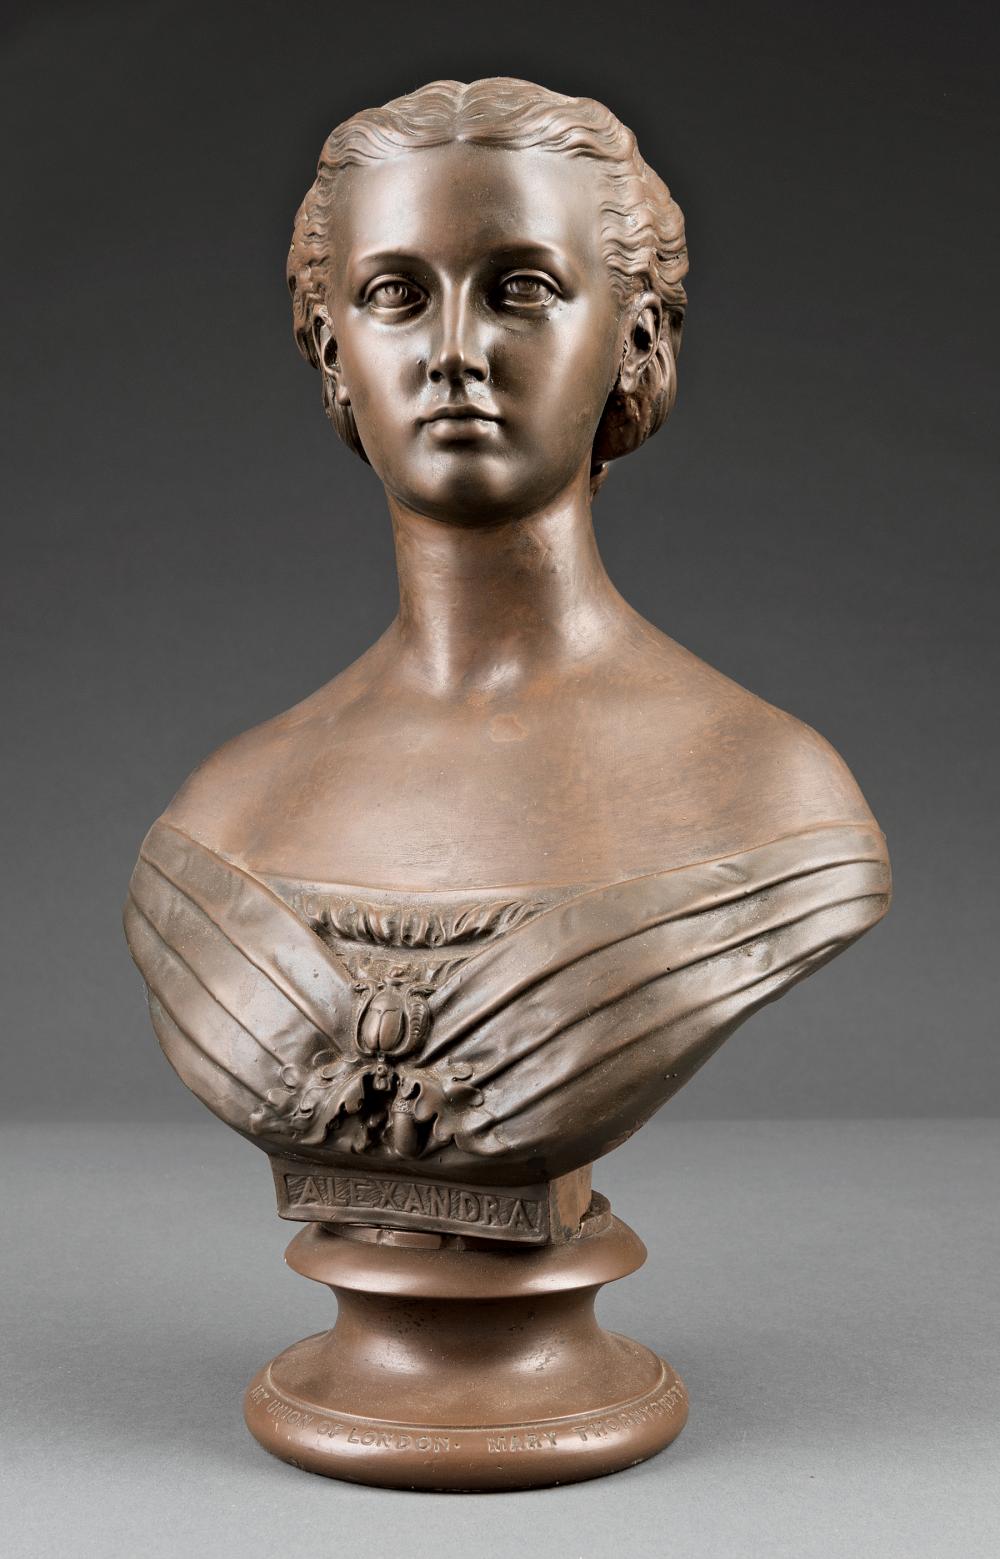 BRONZE-PATINATED PLASTER BUST OF